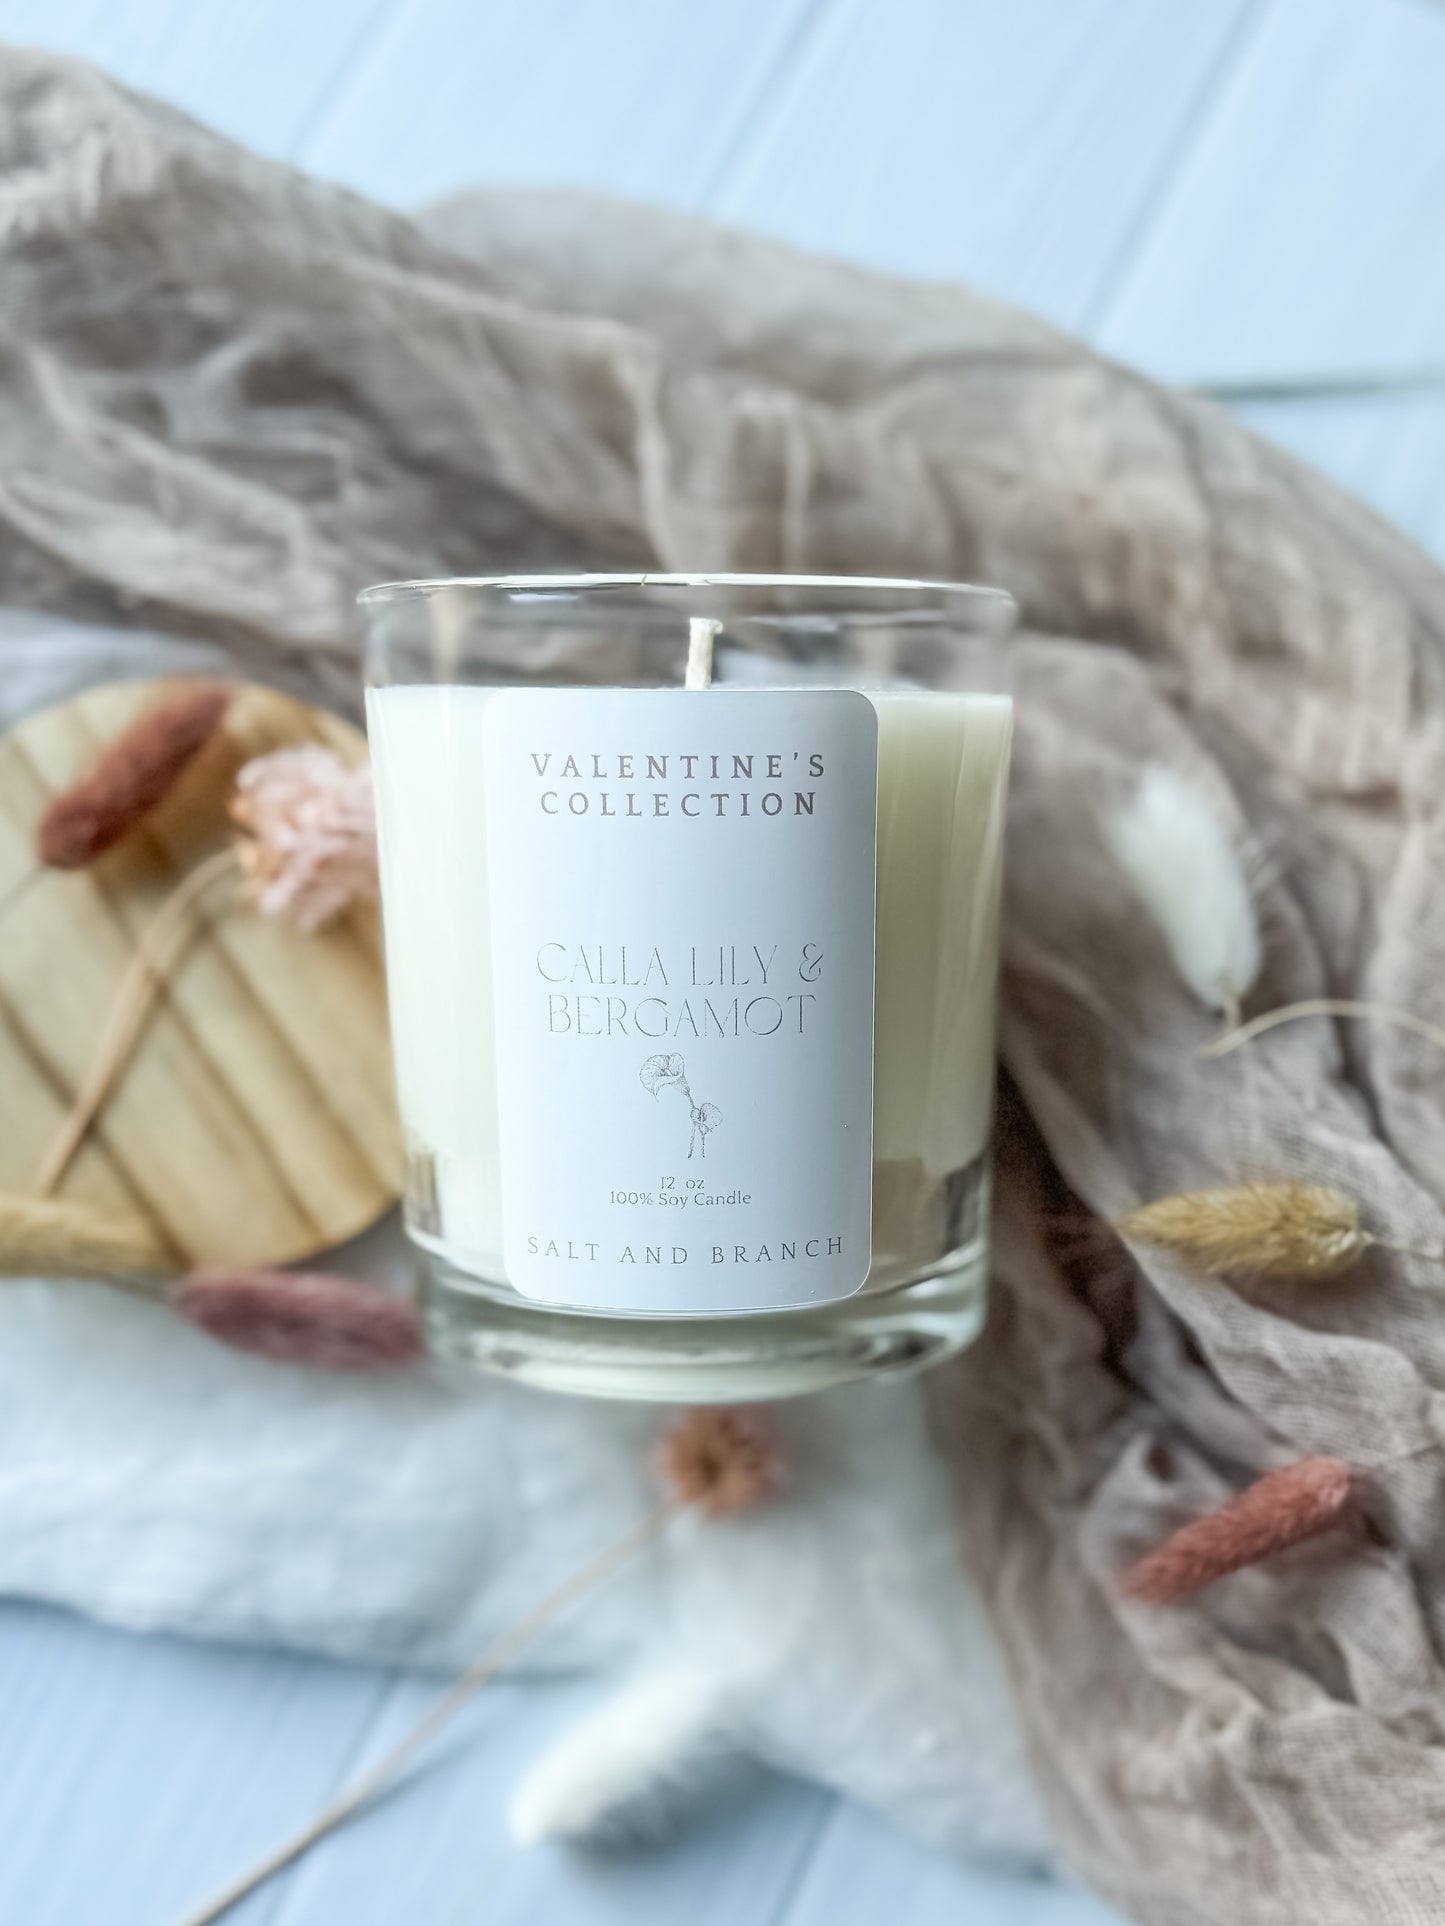 Calla Lily & Bergamot Soy Candle - Salt and Branch